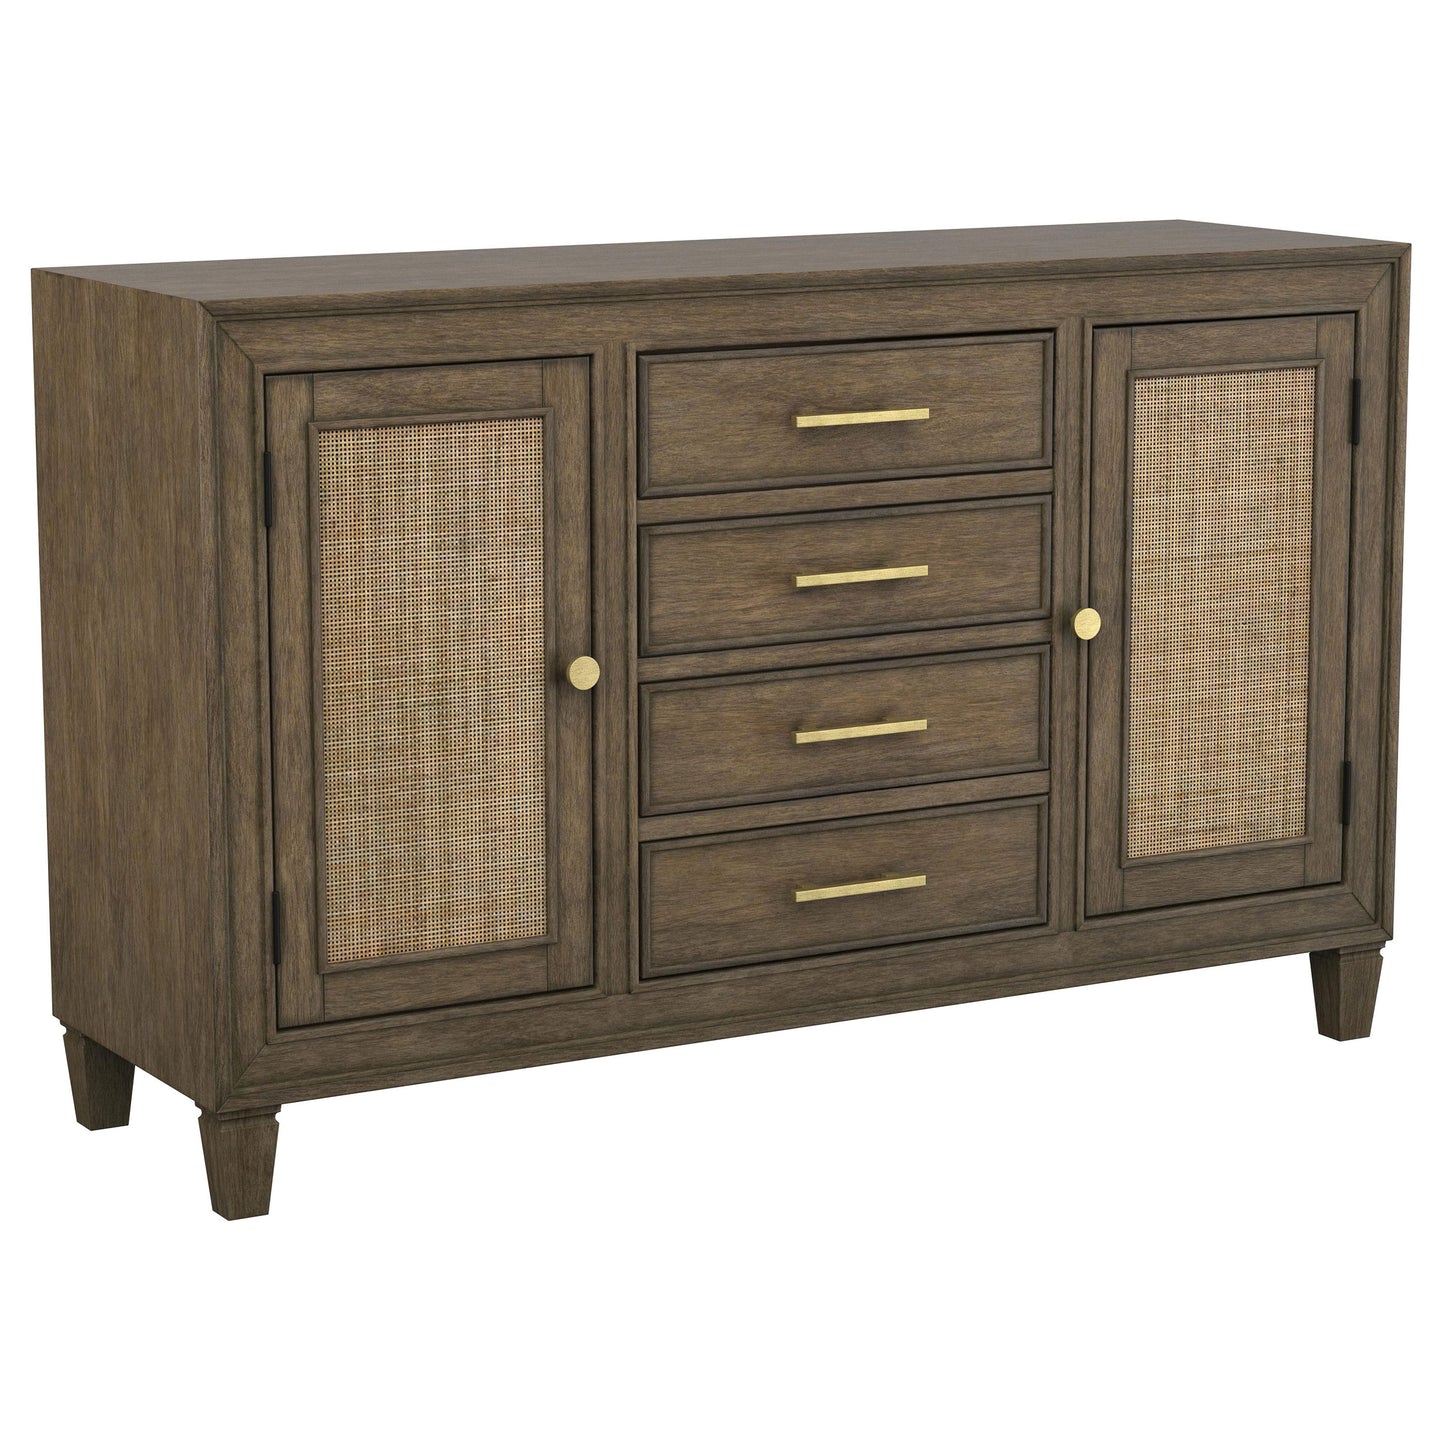 Matisse 4-drawer Dining Sideboard Buffet Cabinet with Rattan Cabinet Doors Brown